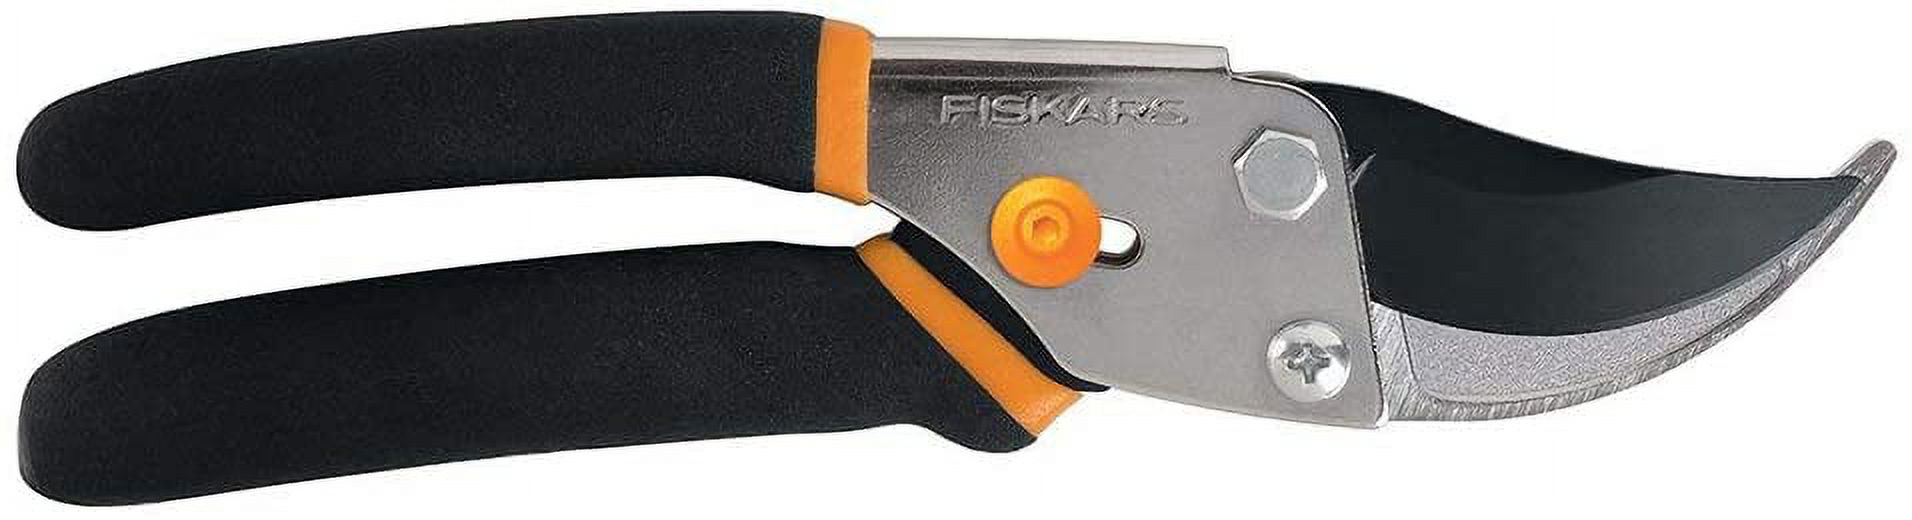 Fiskars Bypass Pruning Shears Garden Tool with Steel Blade - image 1 of 4